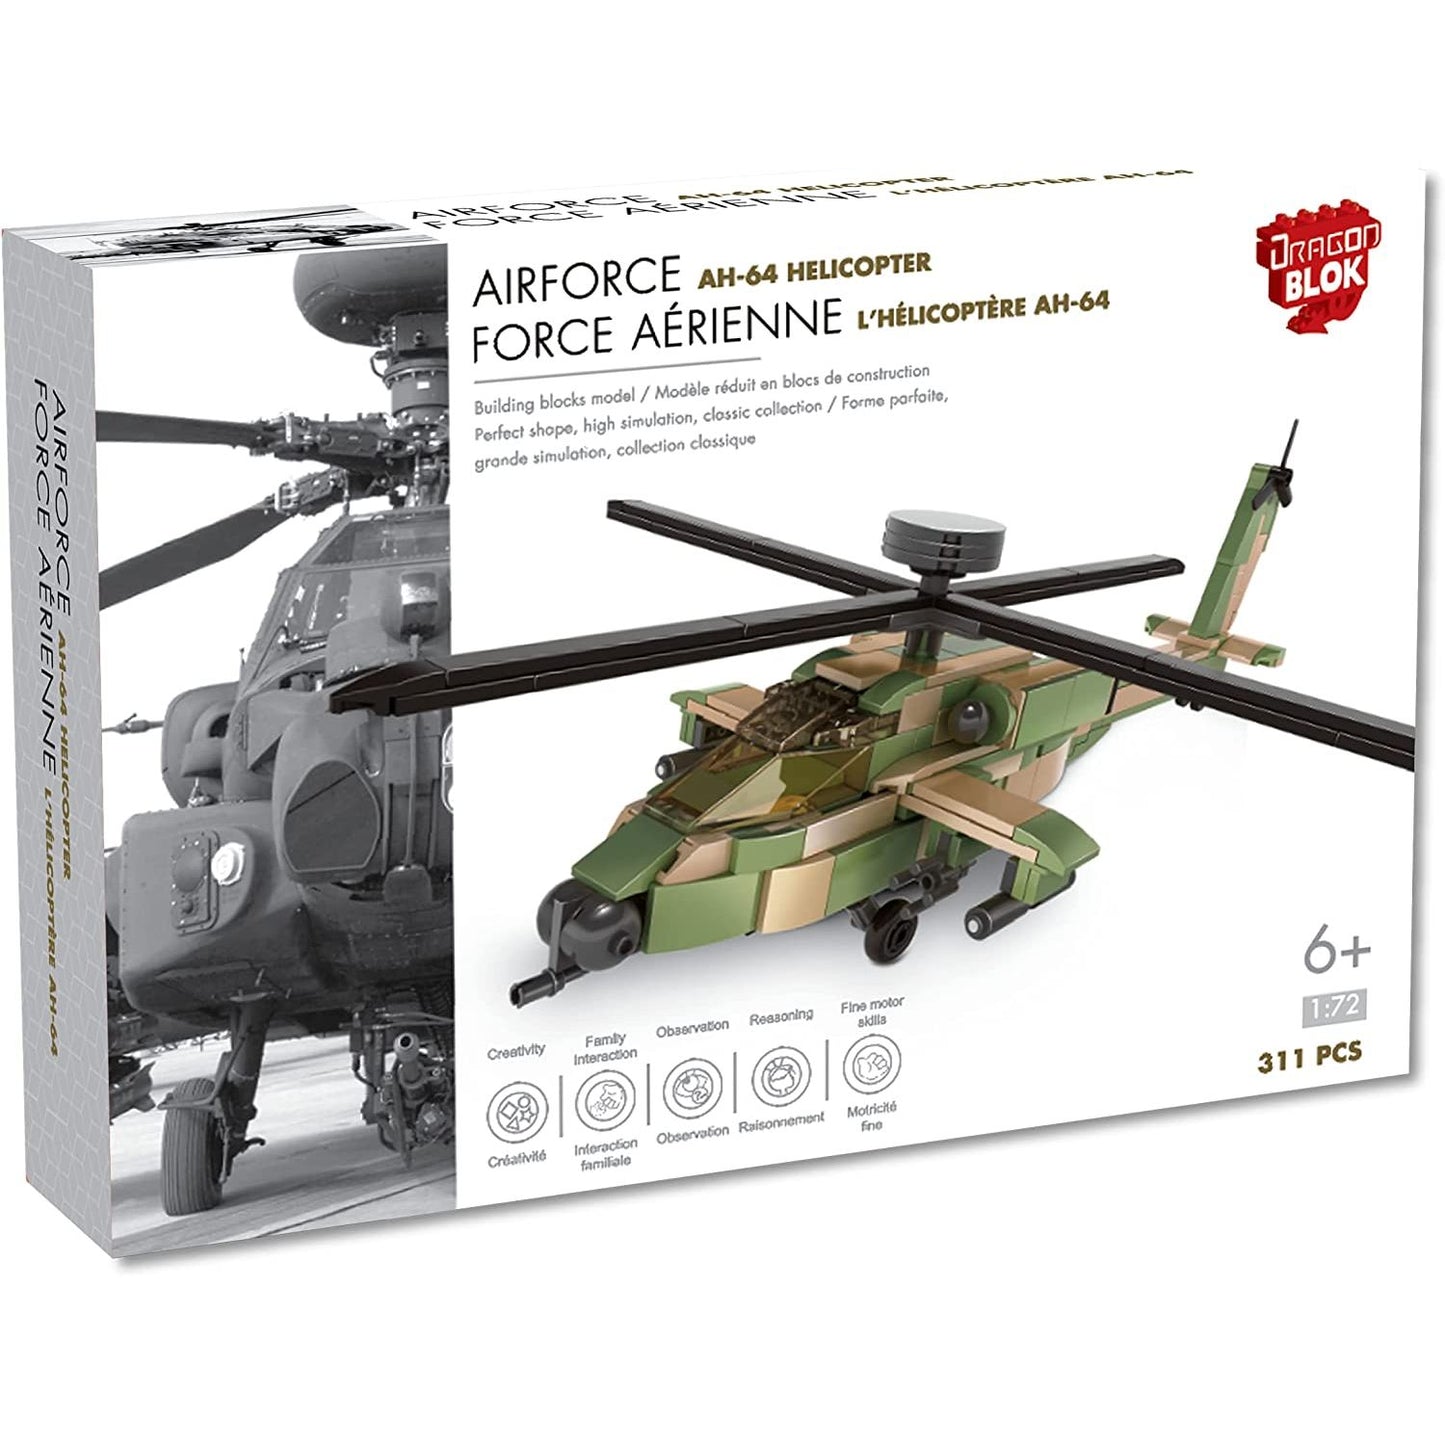 Dragon Blok - Aircraft - AH-64 Helicopter - 311 Pieces